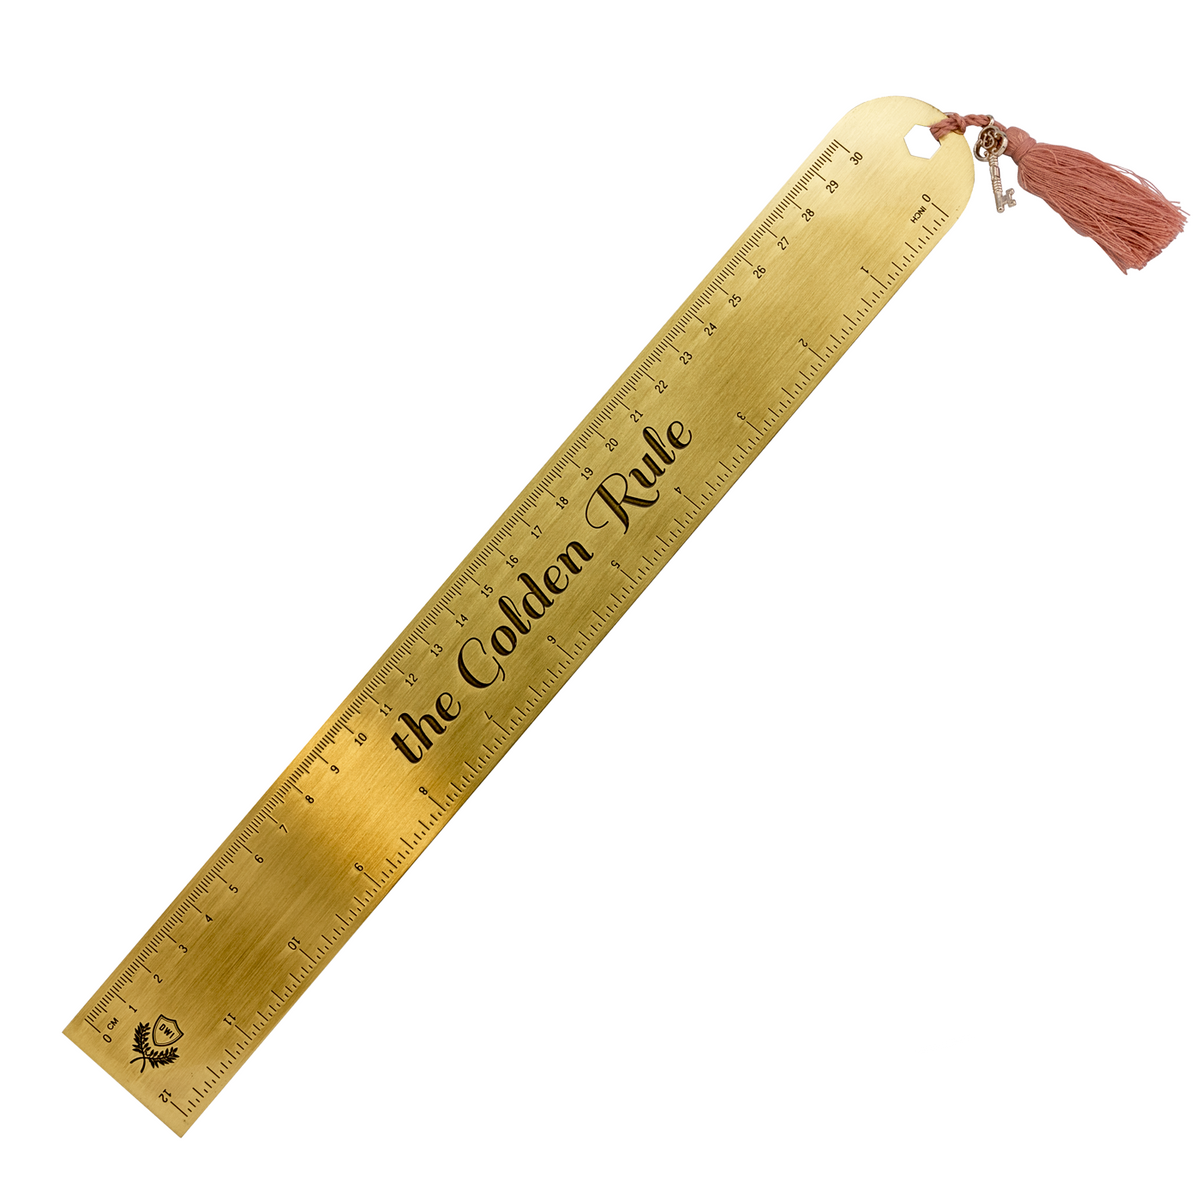 https://cdn.shopify.com/s/files/1/0648/5185/products/the-golden-ruler_1200x.png?v=1646774060